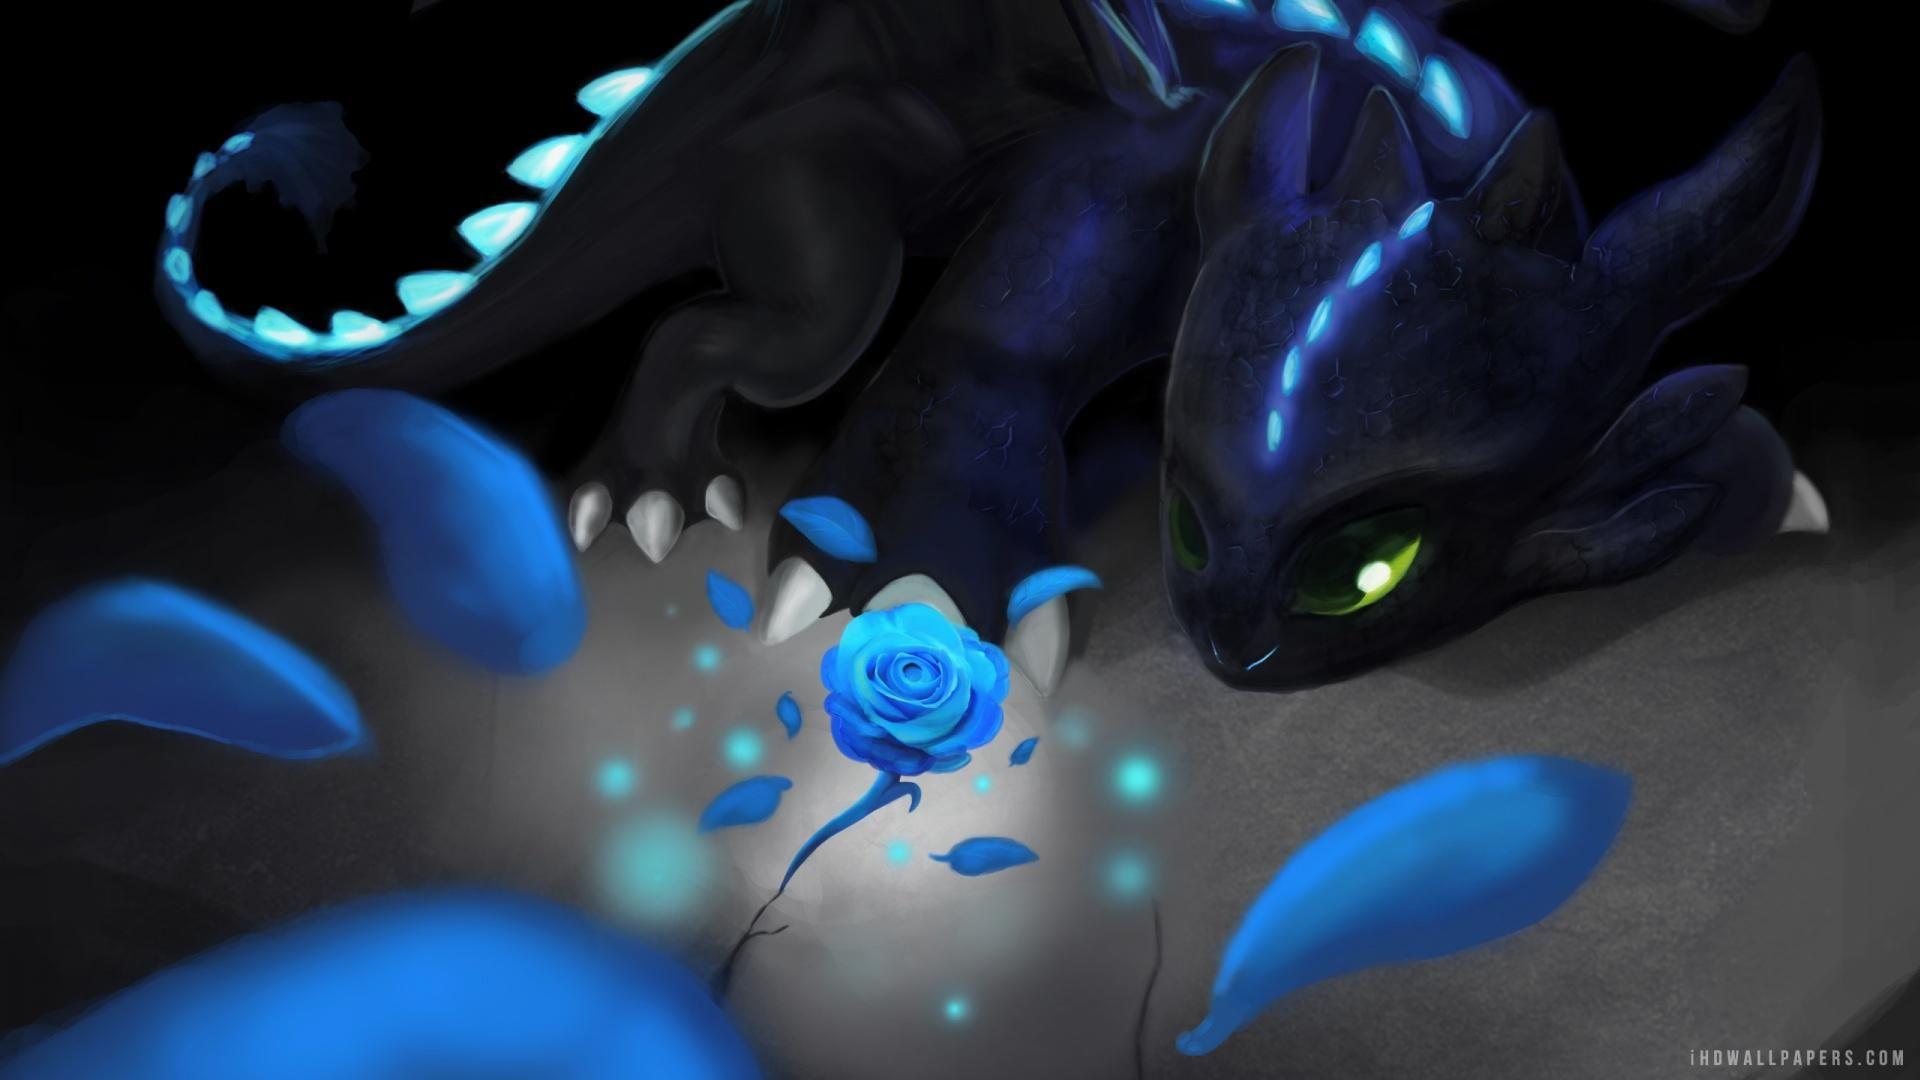 Toothless the dragon wallpaper Gallery